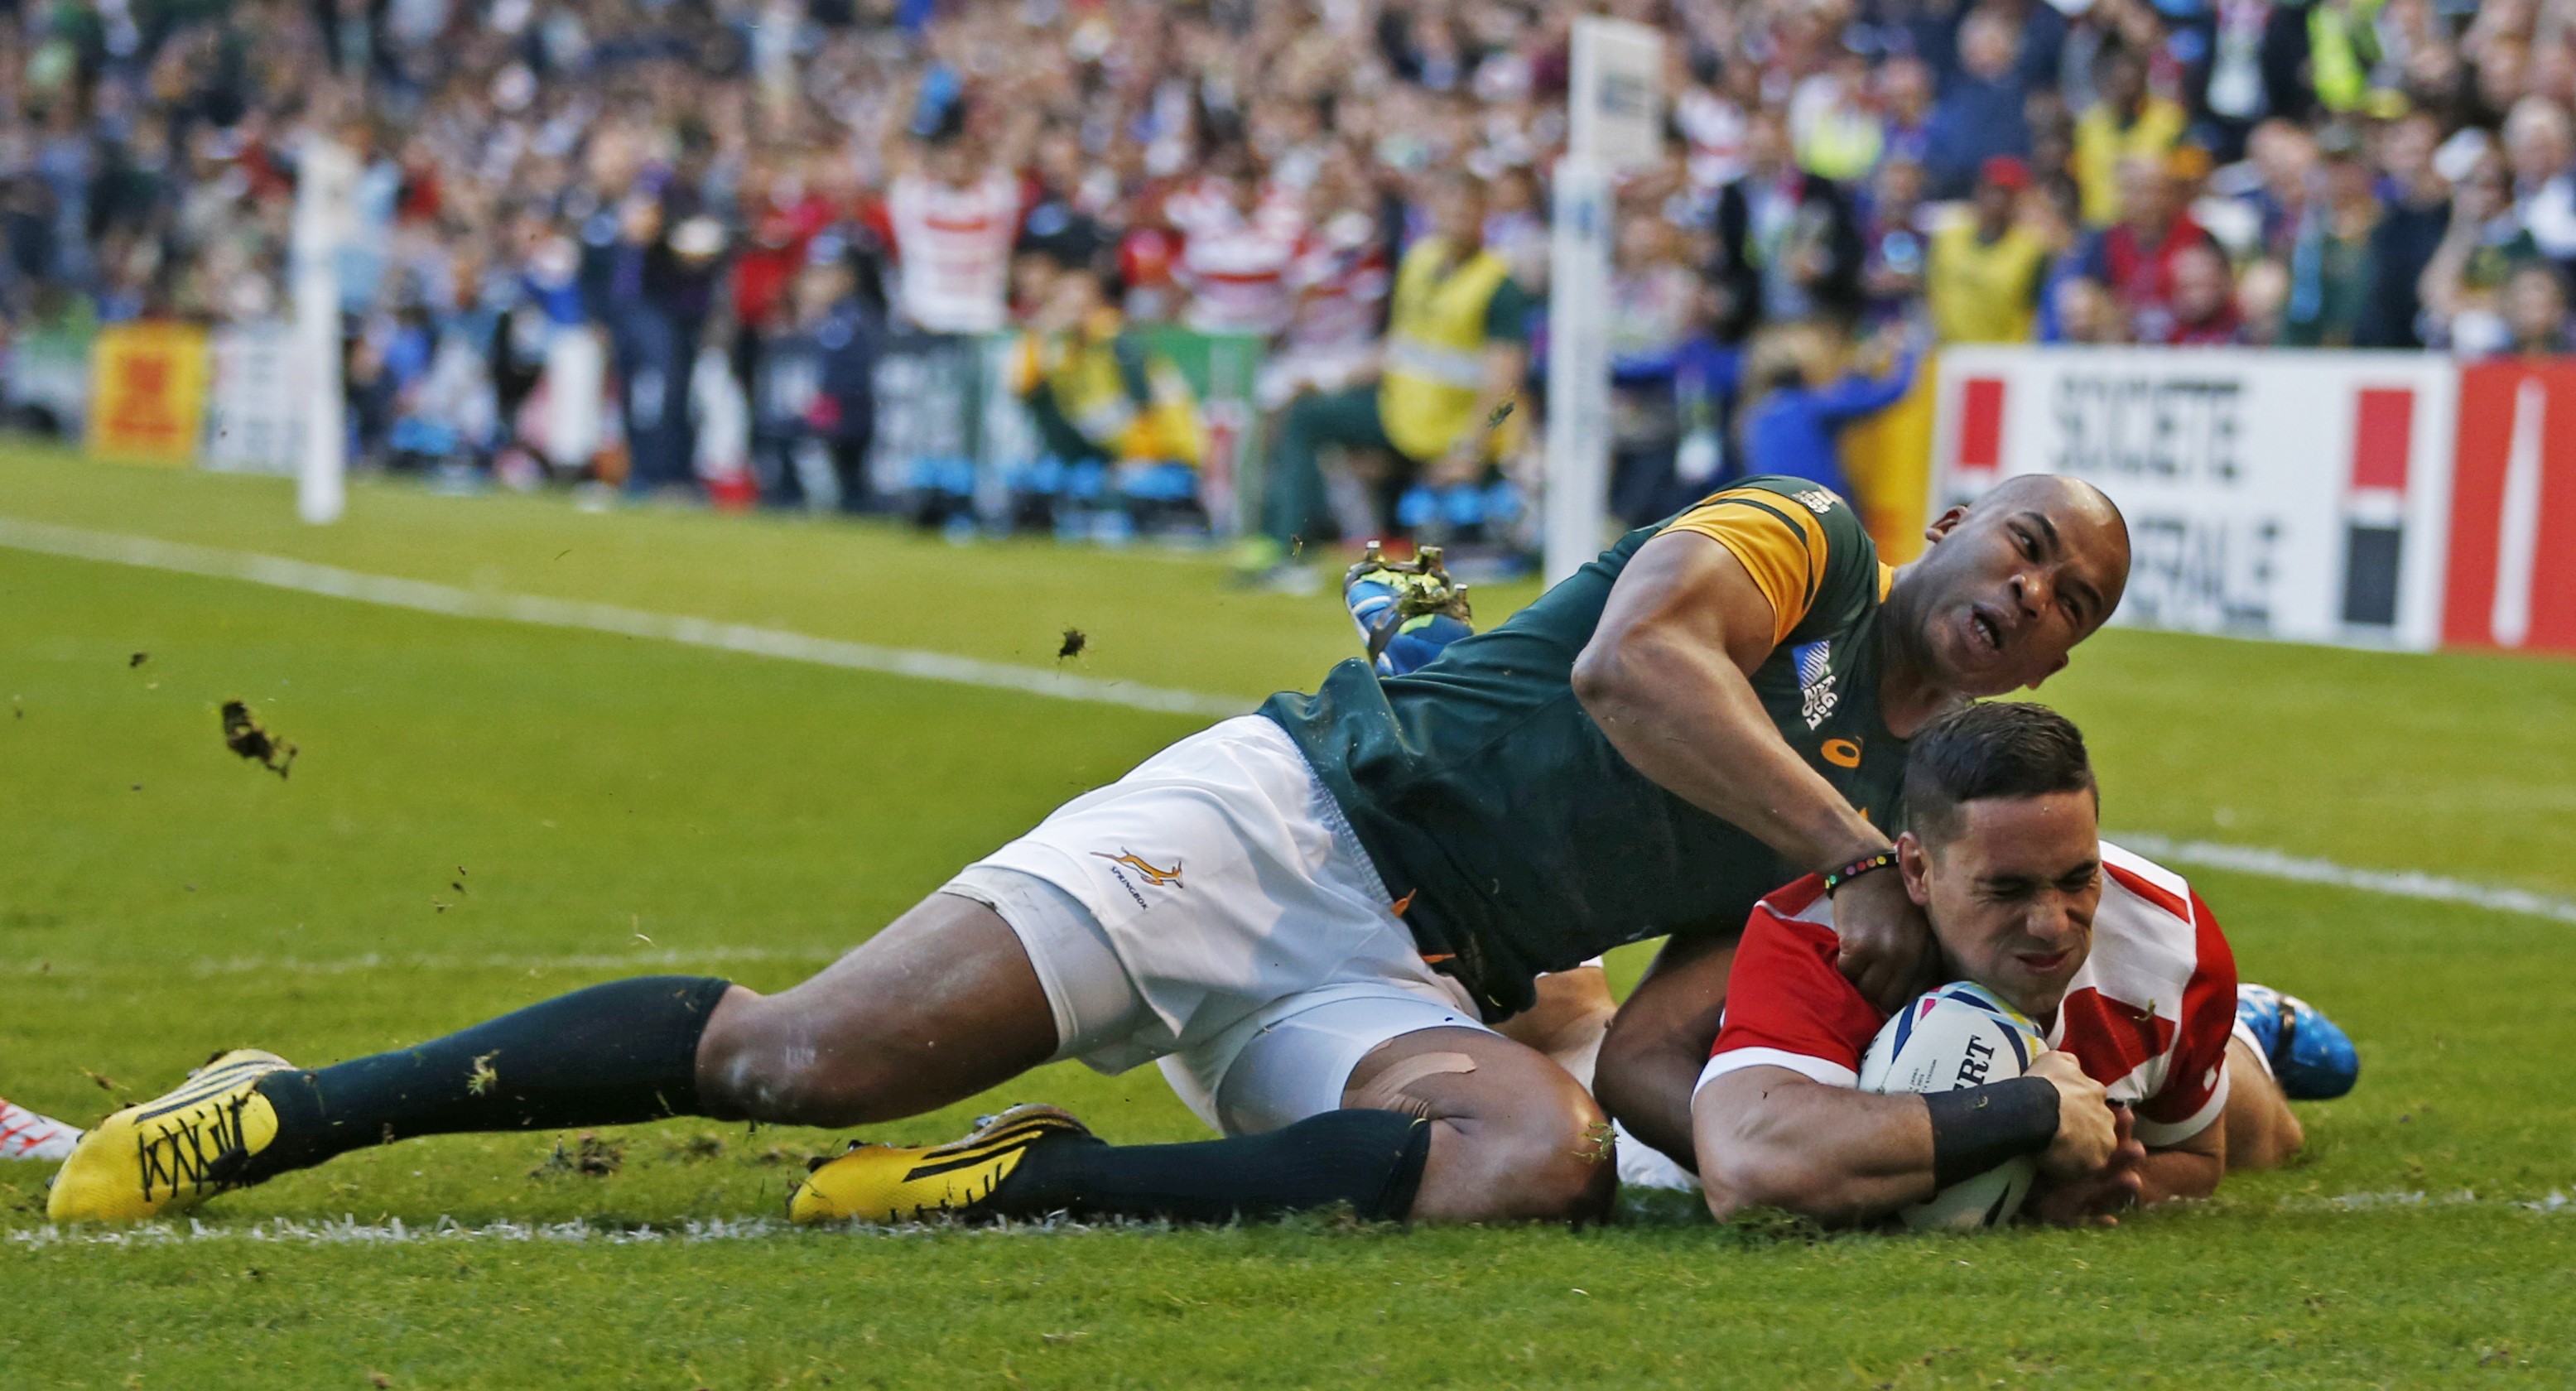 Karne Hesketh scores their third try in the match against South Africa 2015. The moment will be immortalised in a film. Photo: Reuters